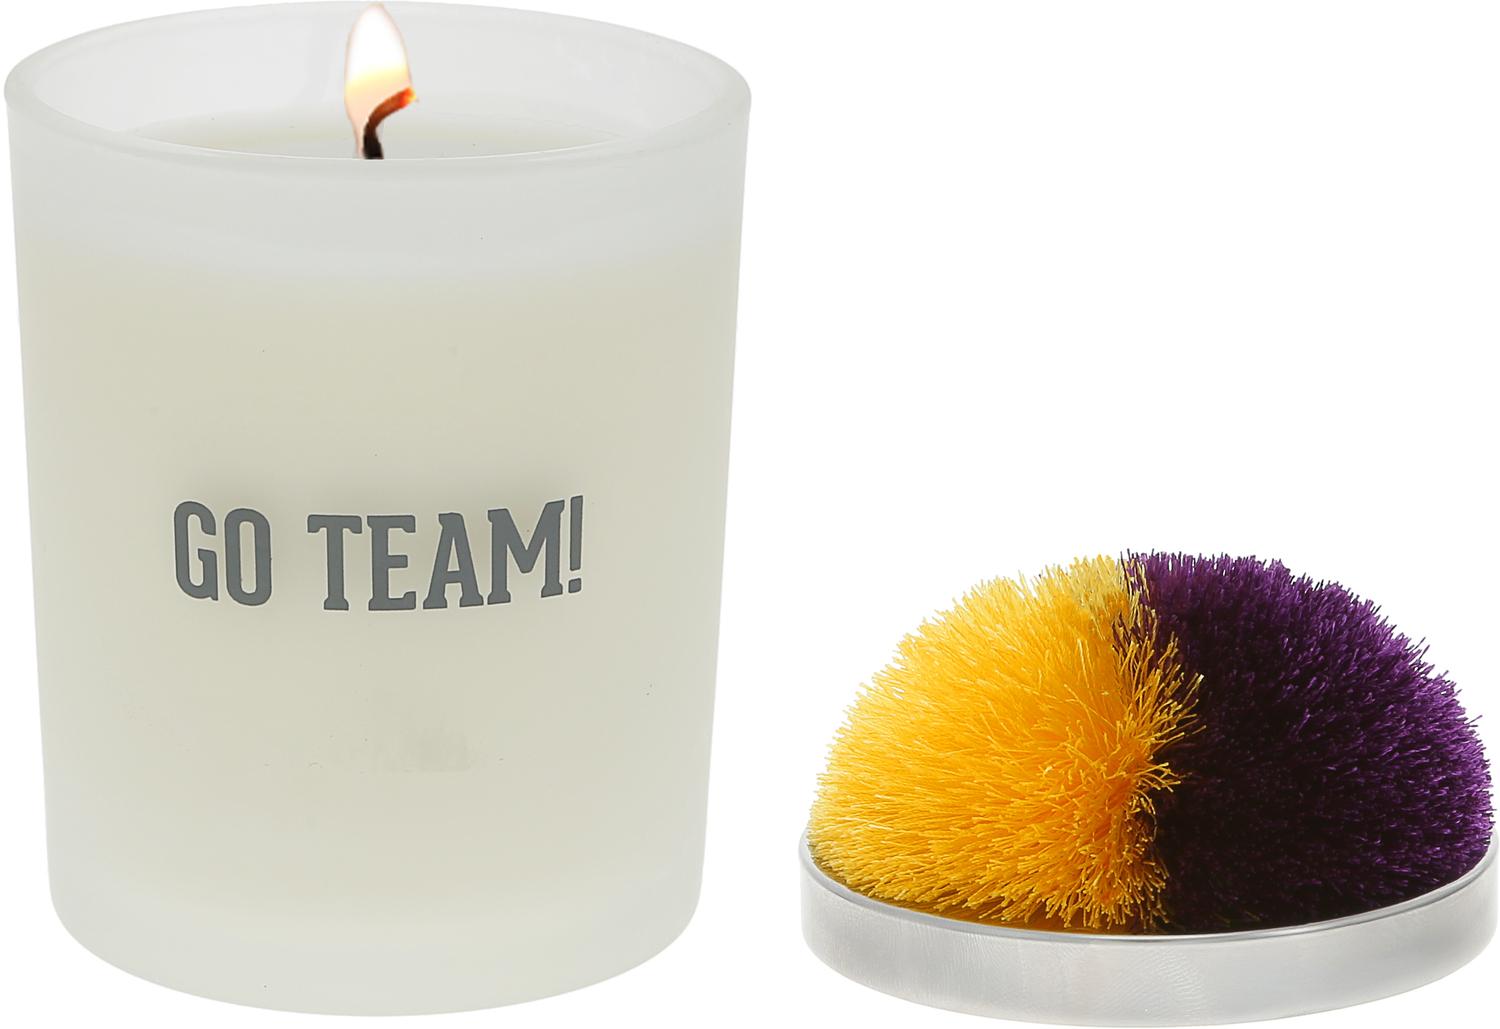 Go Team! - Purple & Yellow by Repre-Scent - Go Team! - Purple & Yellow - 5.5 oz - 100% Soy Wax Candle with Pom Pom Lid
Scent: Tranquility